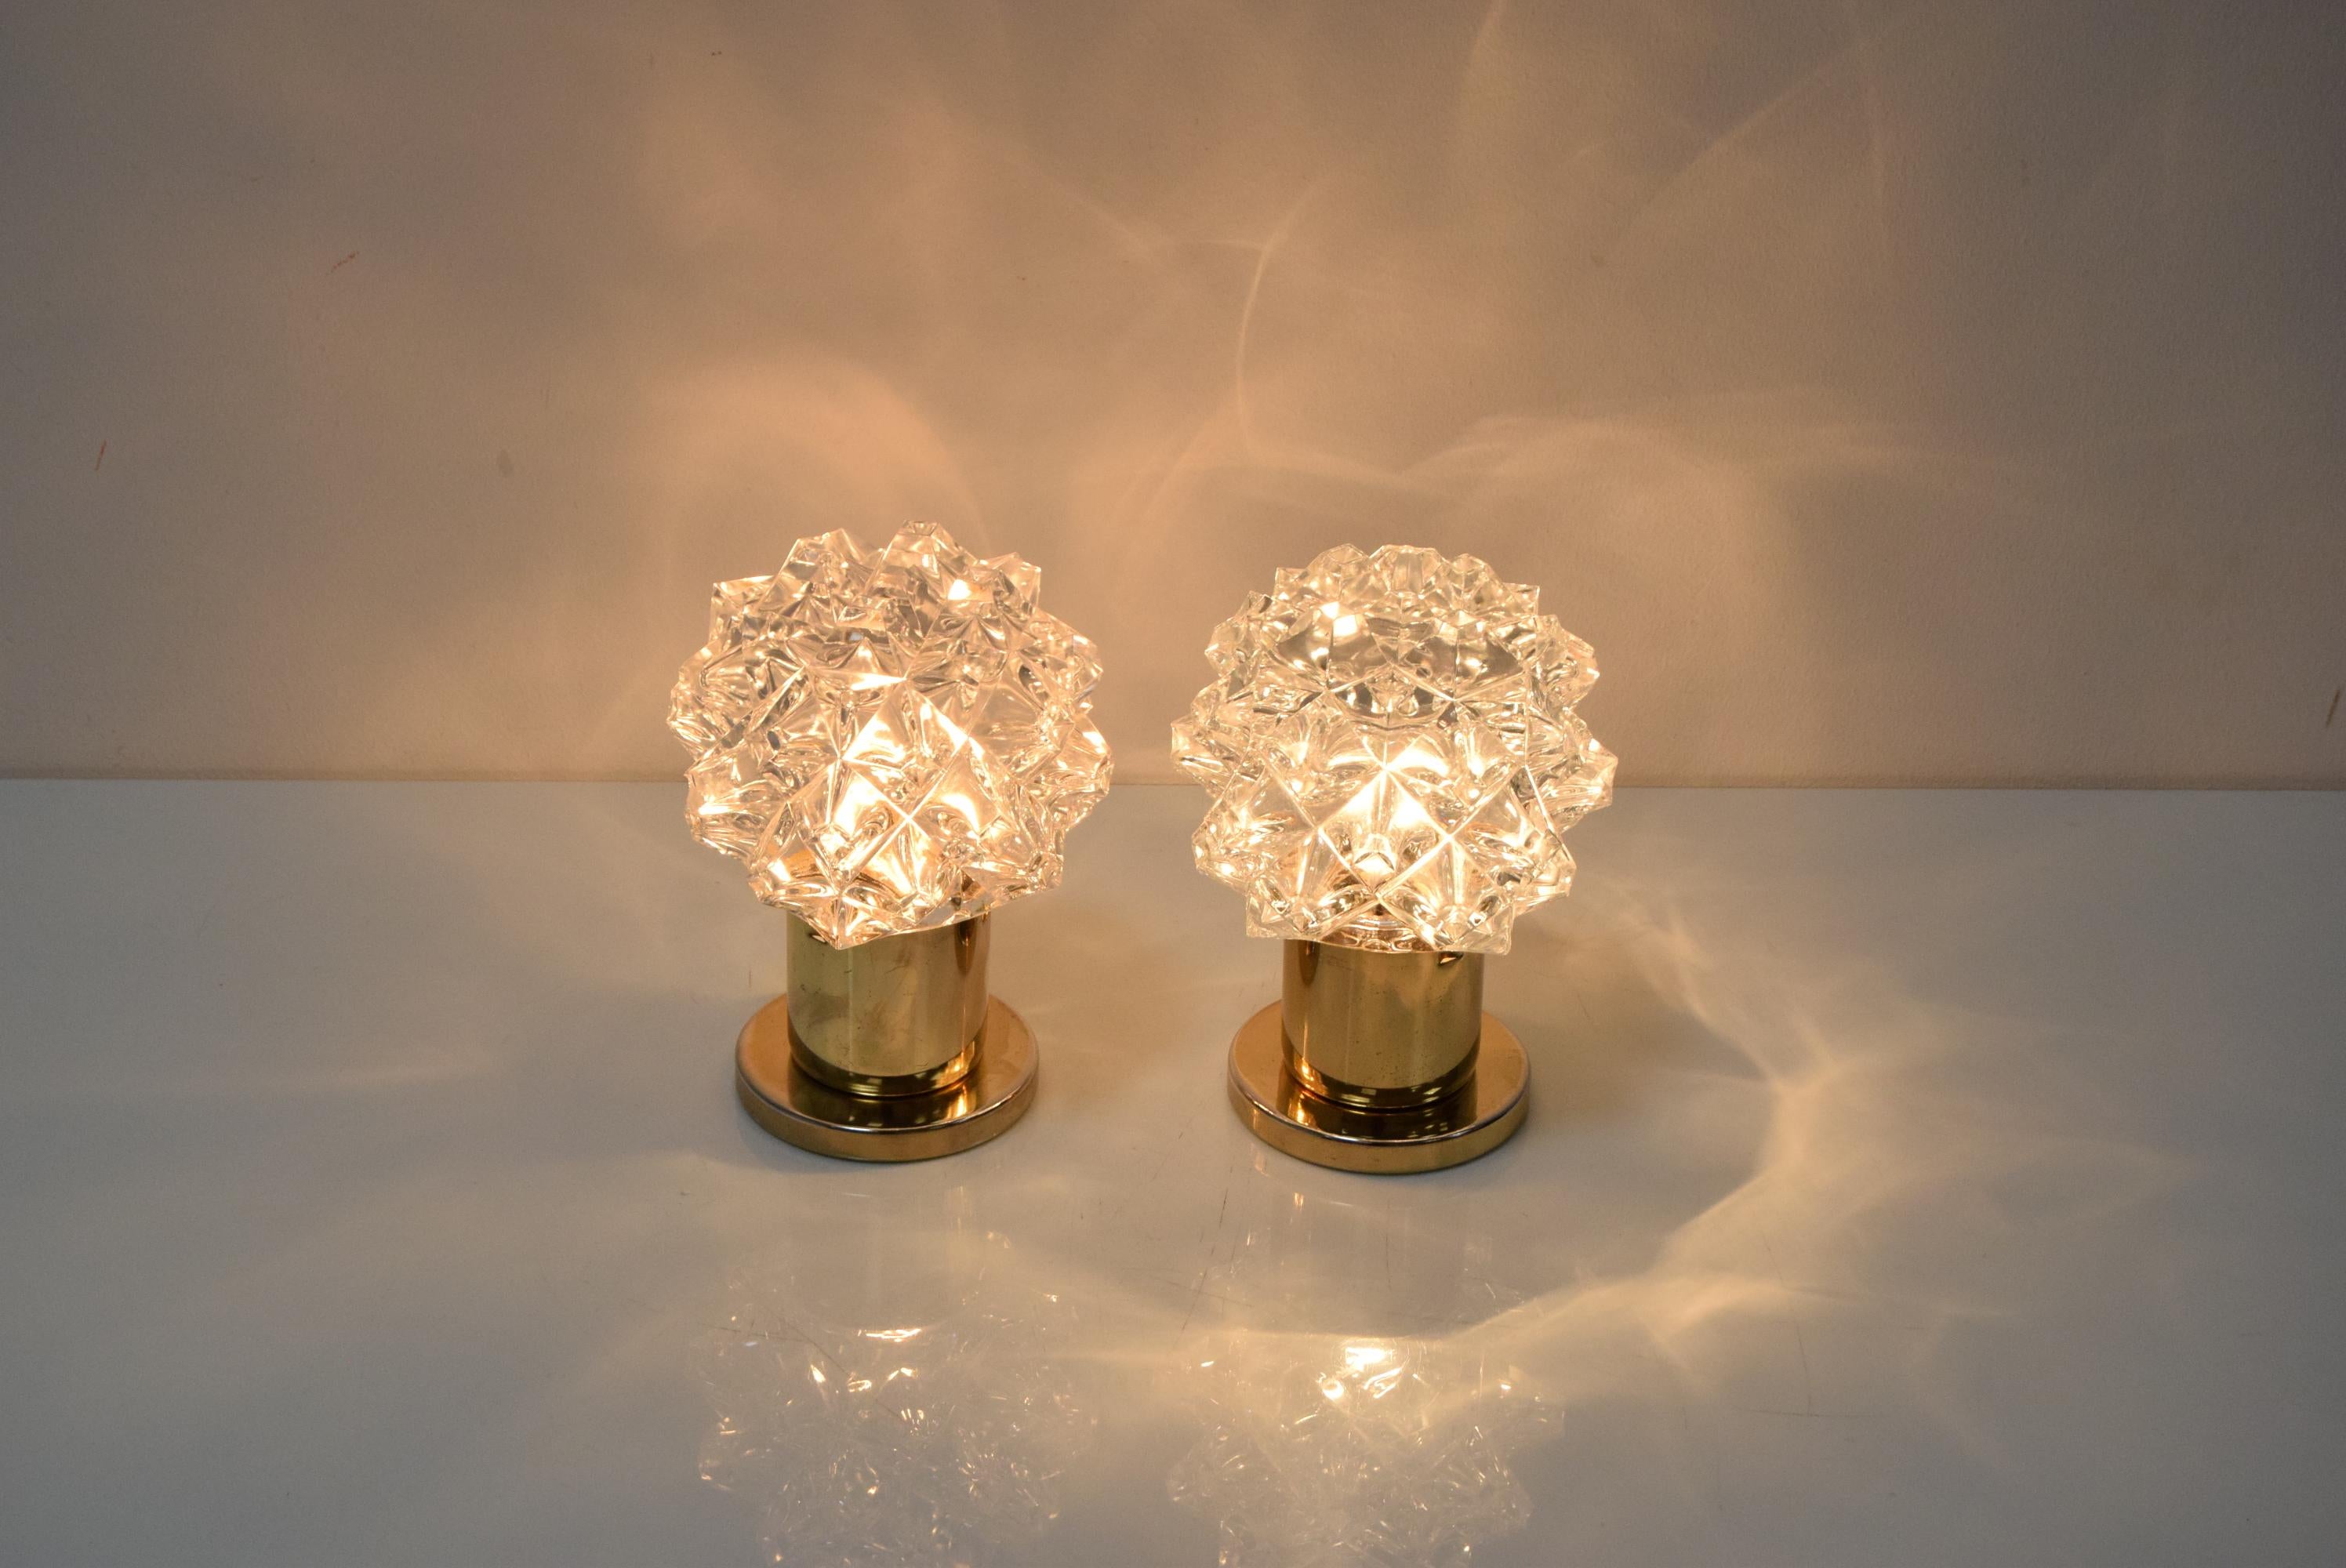 Pair of Design Table or Wall Lamps by Preciosa, Kamenicky Senov, 1960's. For Sale 6